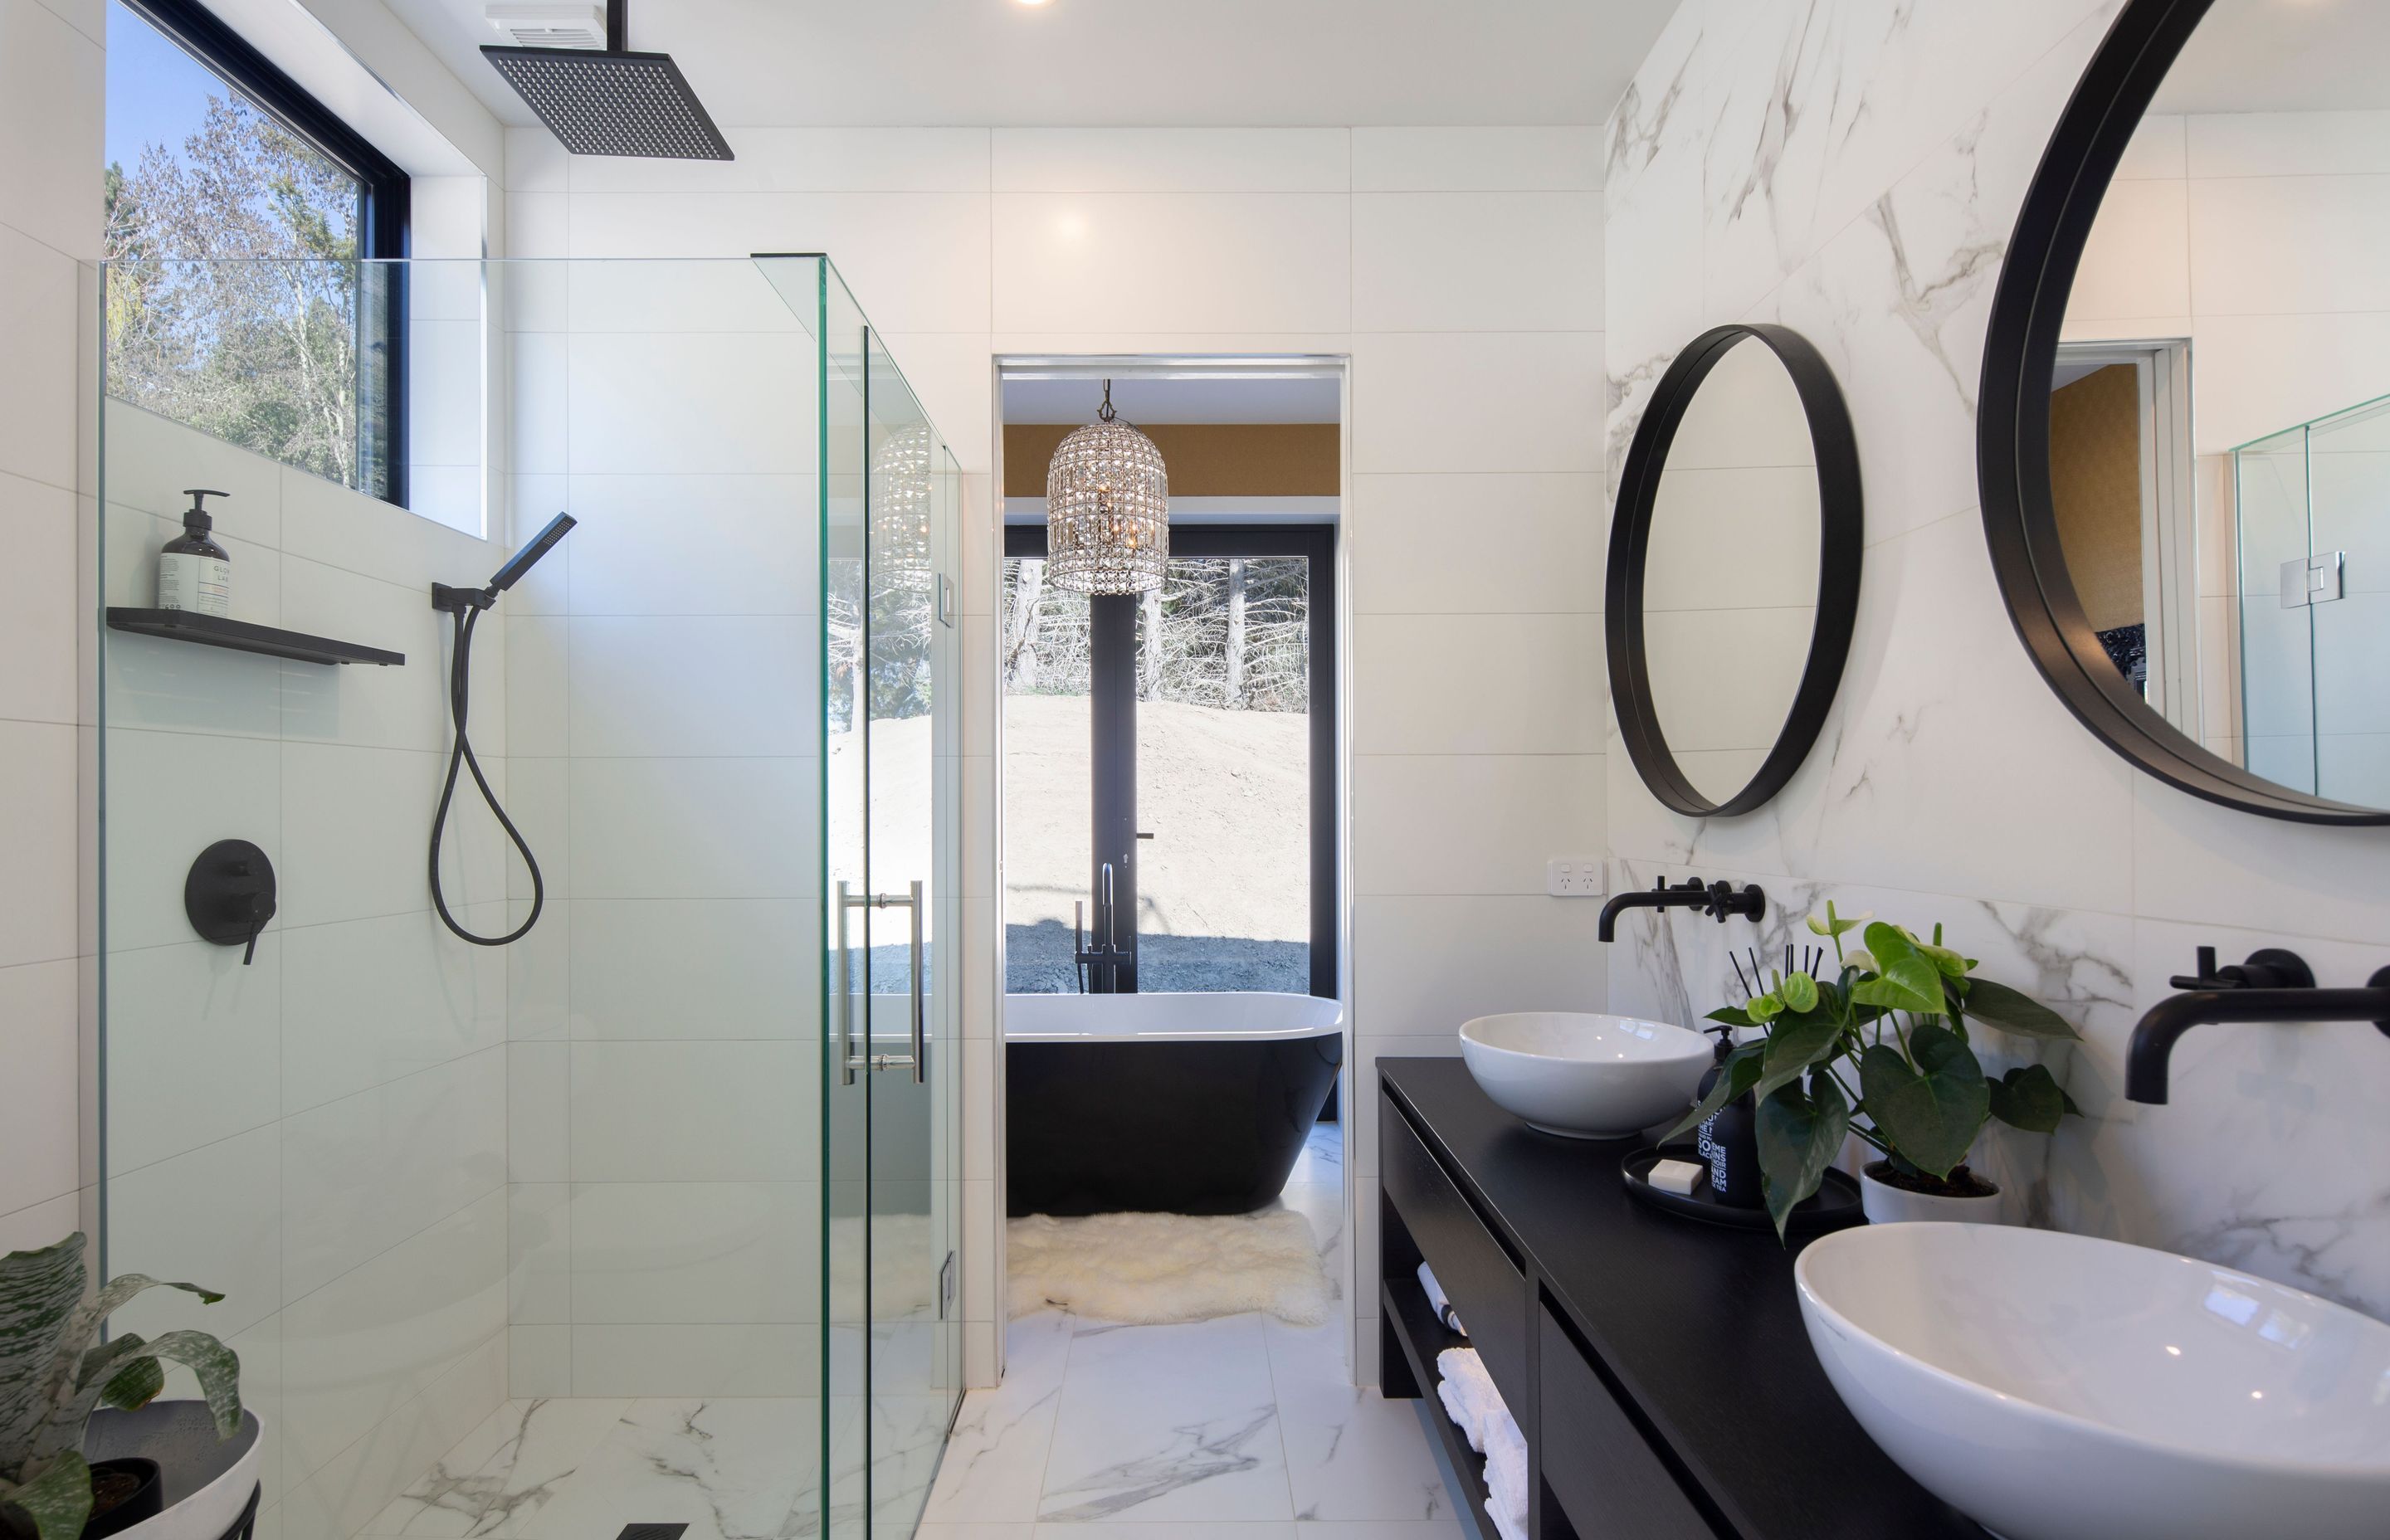 Main bathroom which follows a contemporary black and white theme with same marble floor tiling as the guest bathroom from Flooring Xtra.